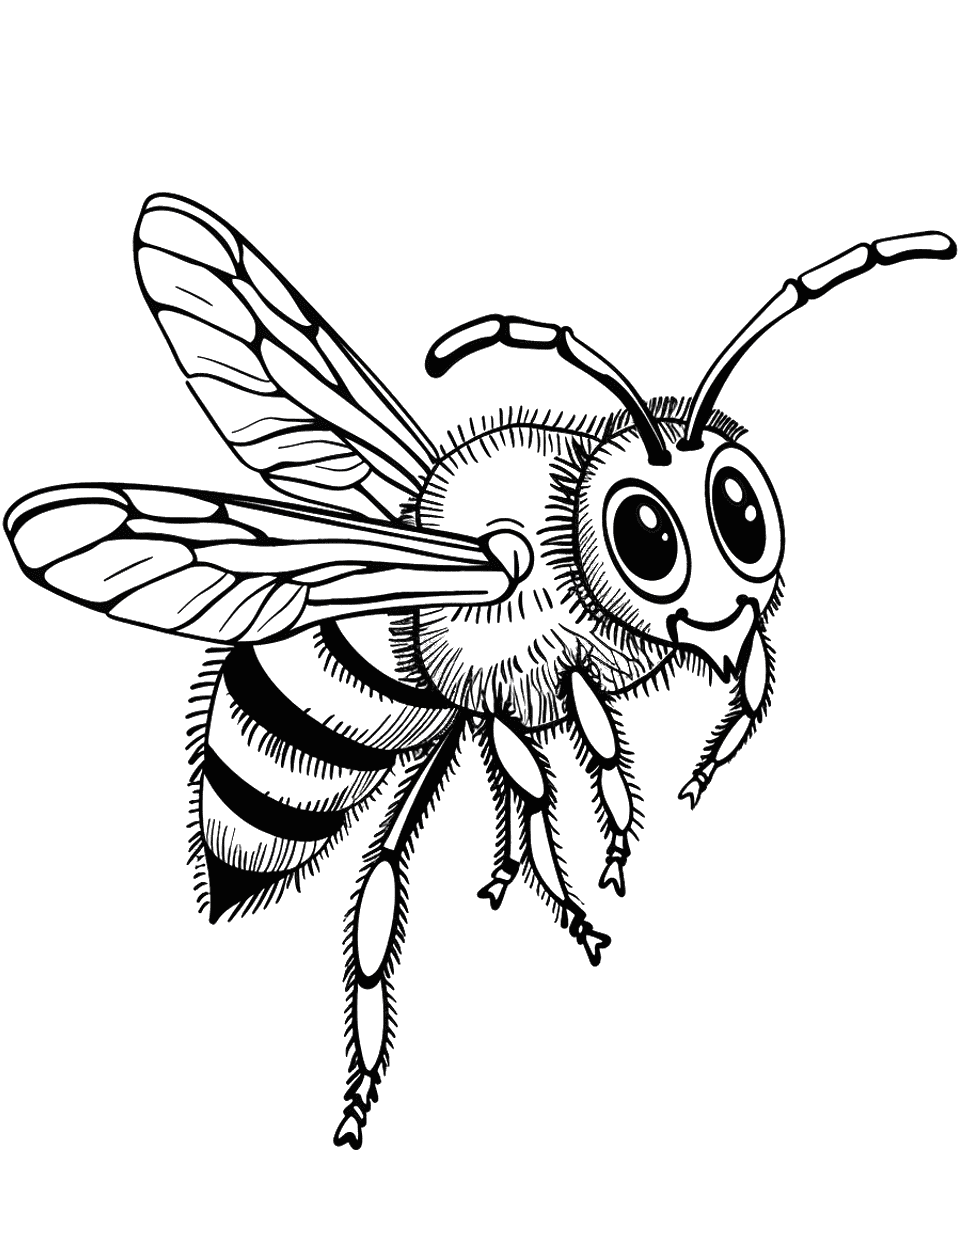 First Flight Bee Coloring Page - A young bee experiencing its first flight, with a look of determination and wonder.